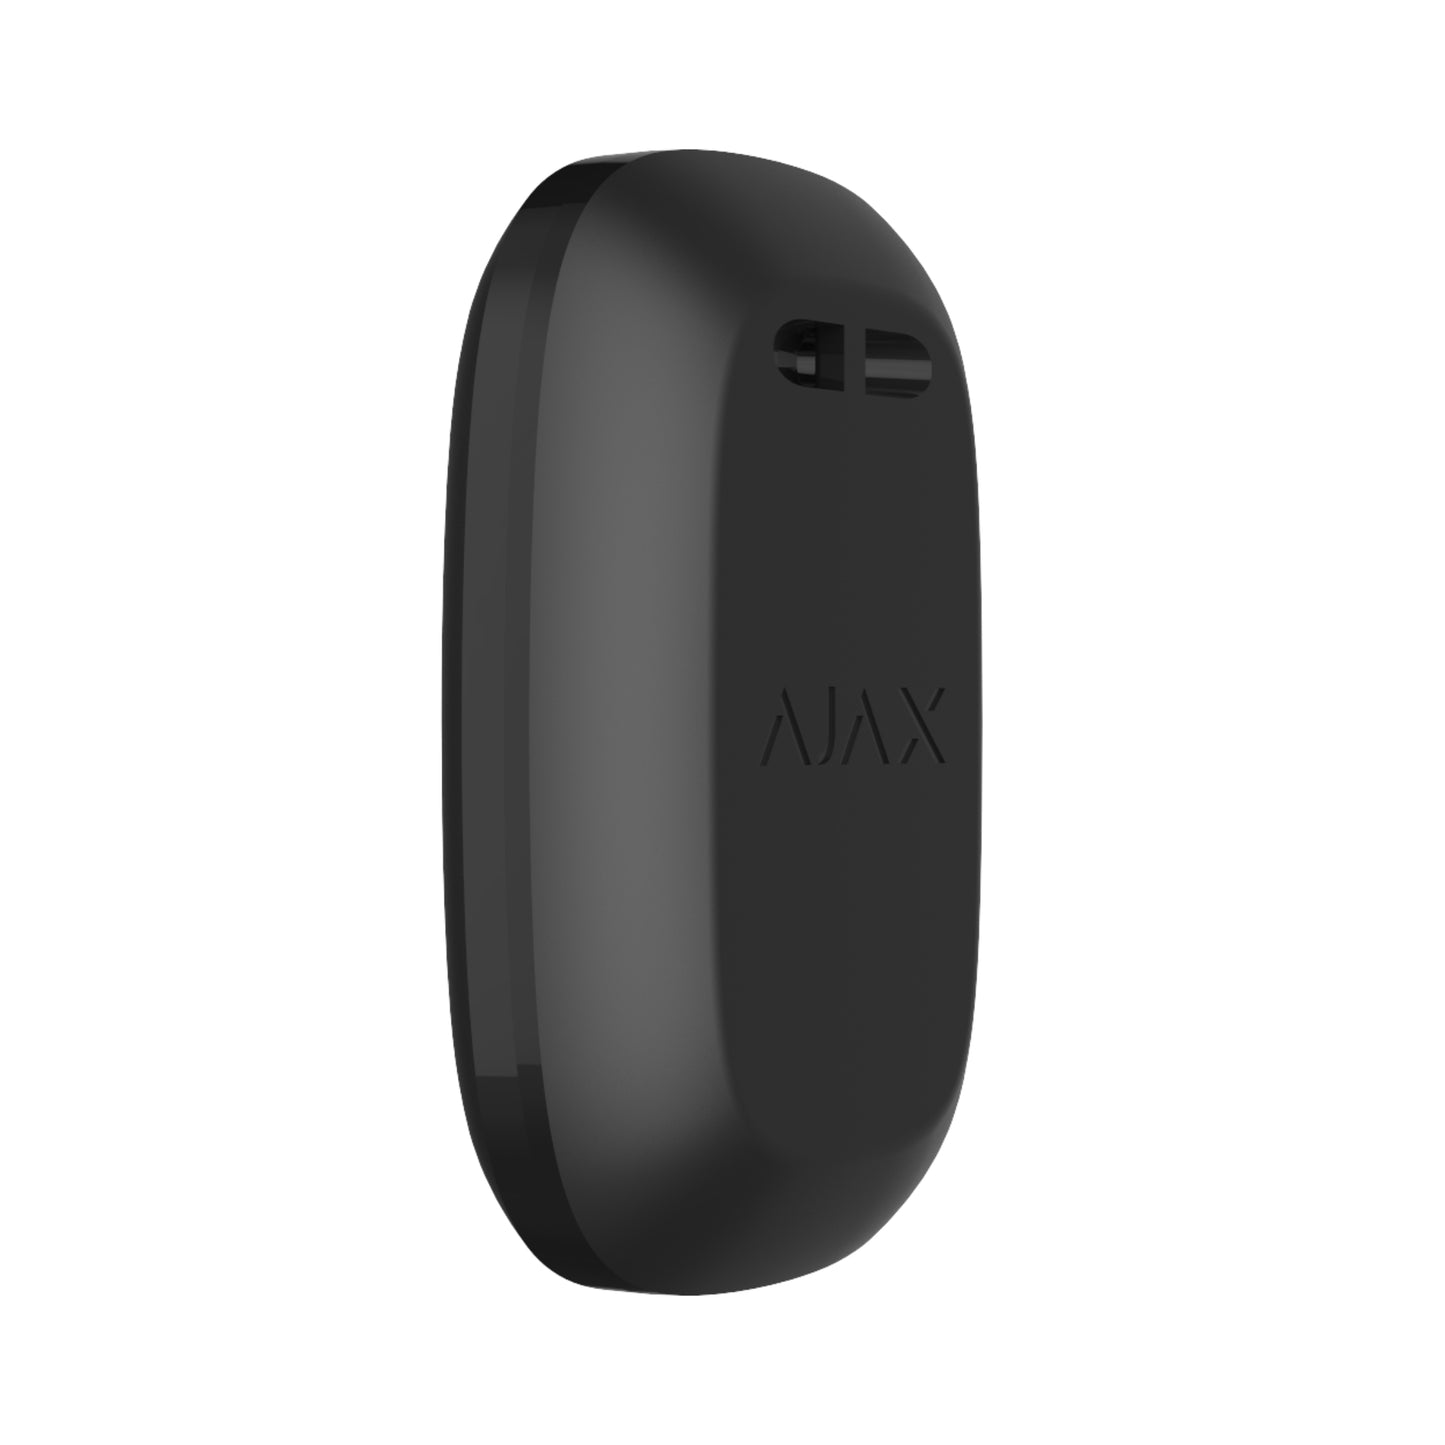 Black Ajax panic button, wireless emergency button, and control device. can be used as a mobile panic switch. 47 × 35 × 13 mm in Size, 16grams in weight. Rated IP55 . Side / Back view of Device.